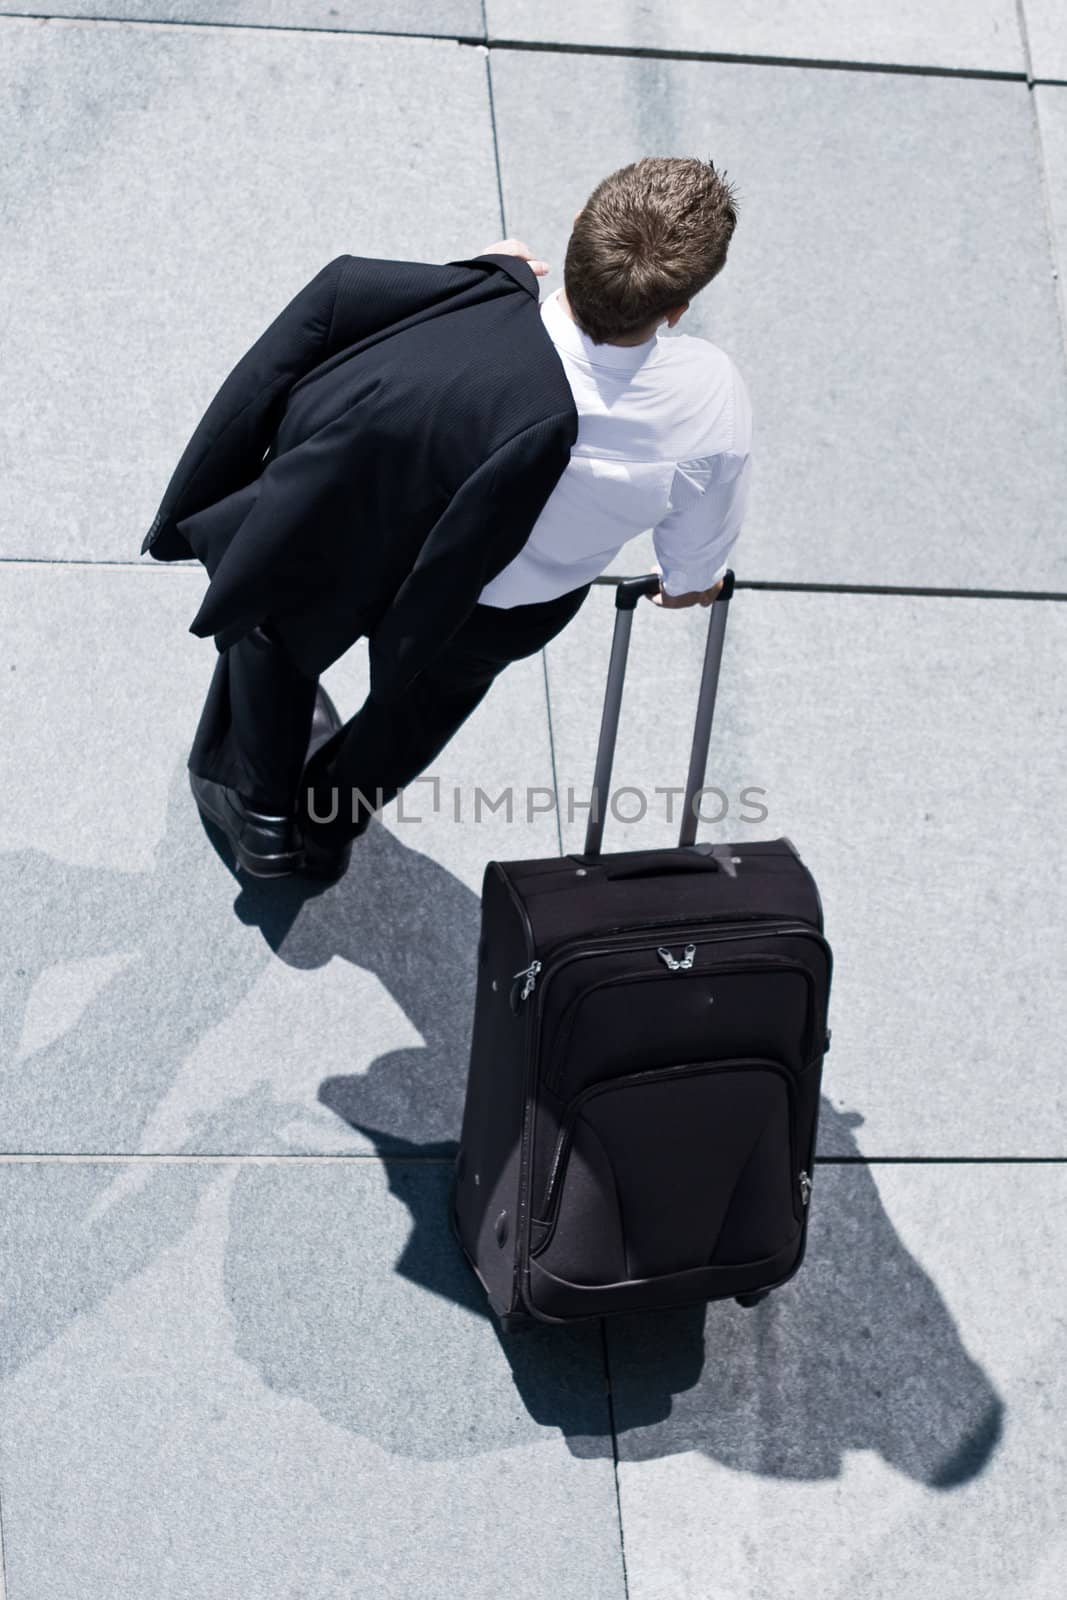 Corporate Man With Rolling Luggage by nfx702